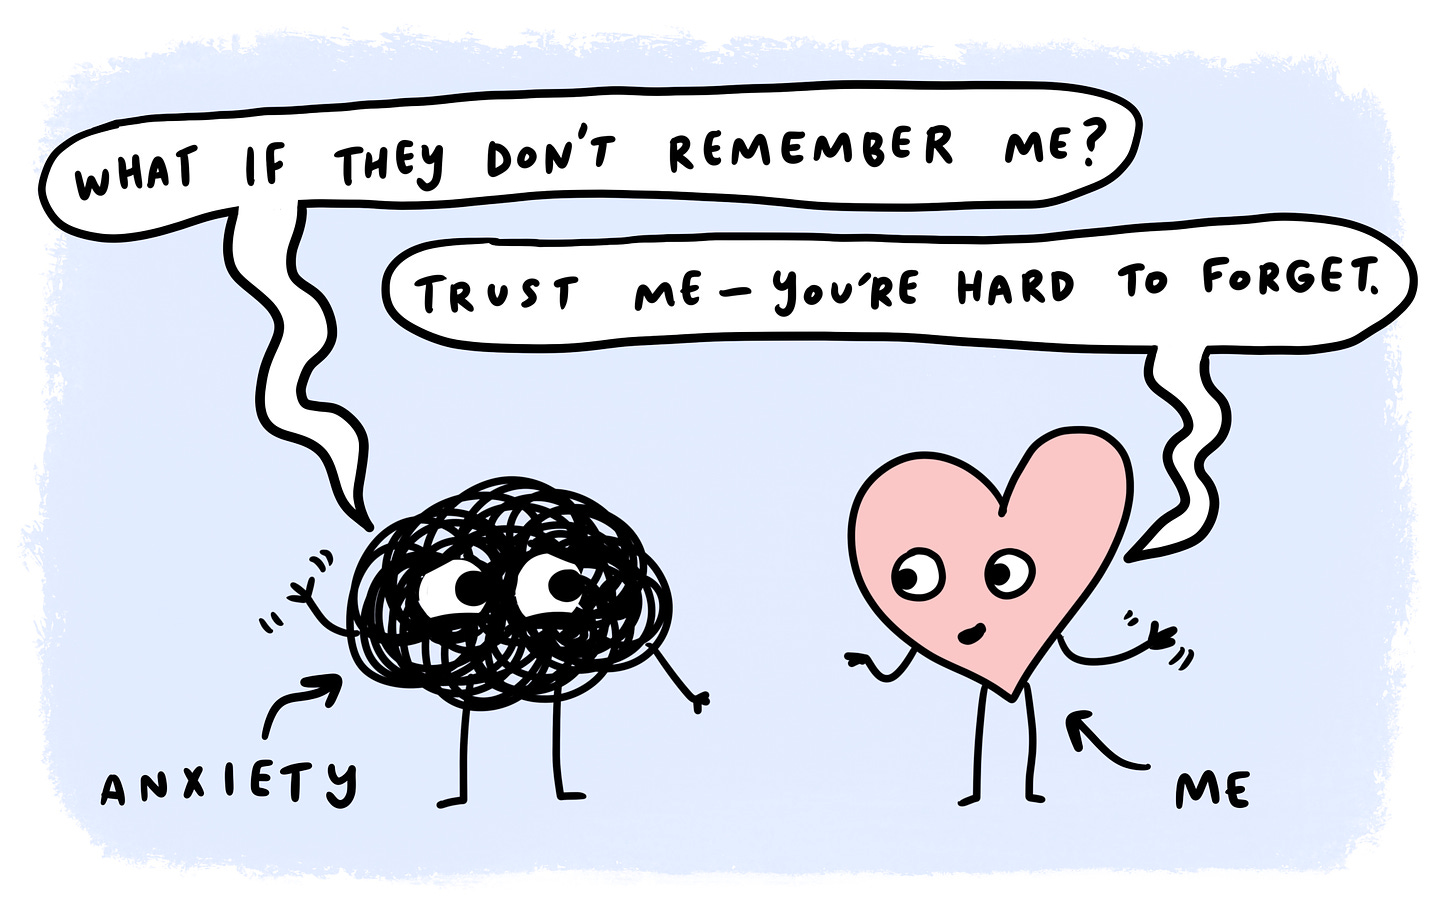 Anxiety, a scribble asks, "what if they don't remember me?" and I, a heart, respond "trust me, you're hard to forget."